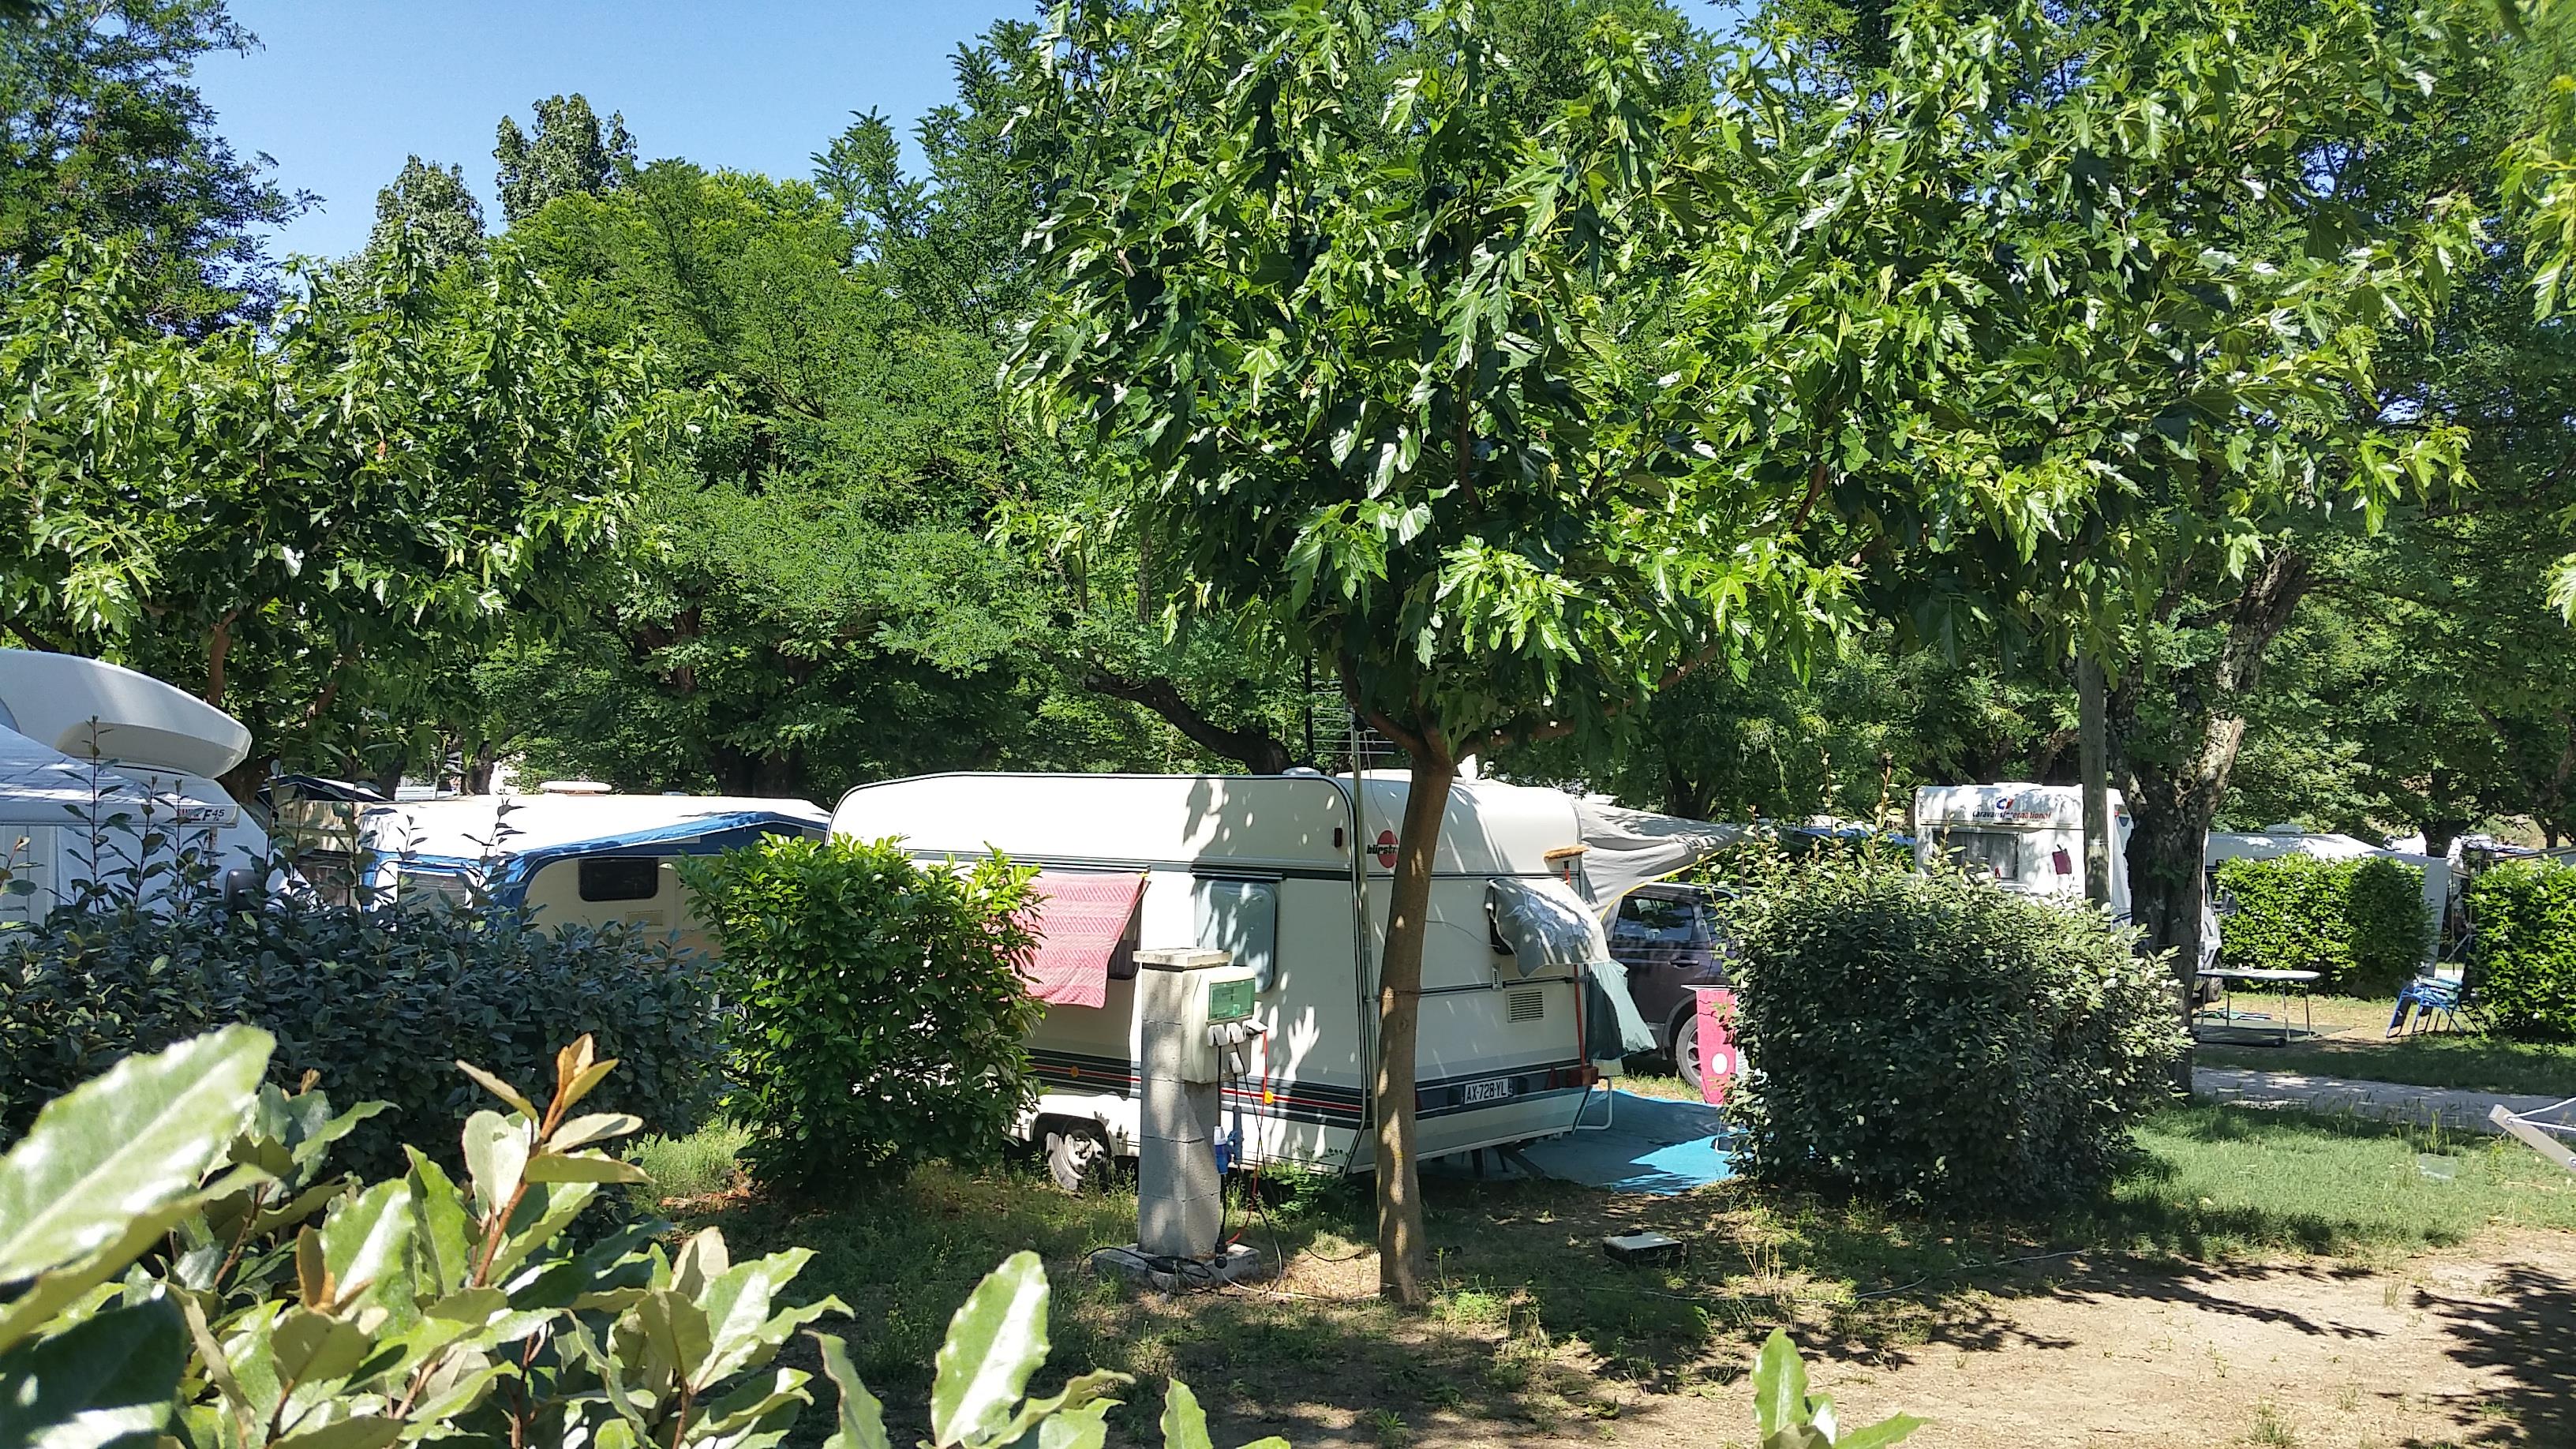 Pitch - Pitch 2 People + 1 Car Or Motorhome + Electricity 10A + Wifi - International Camping